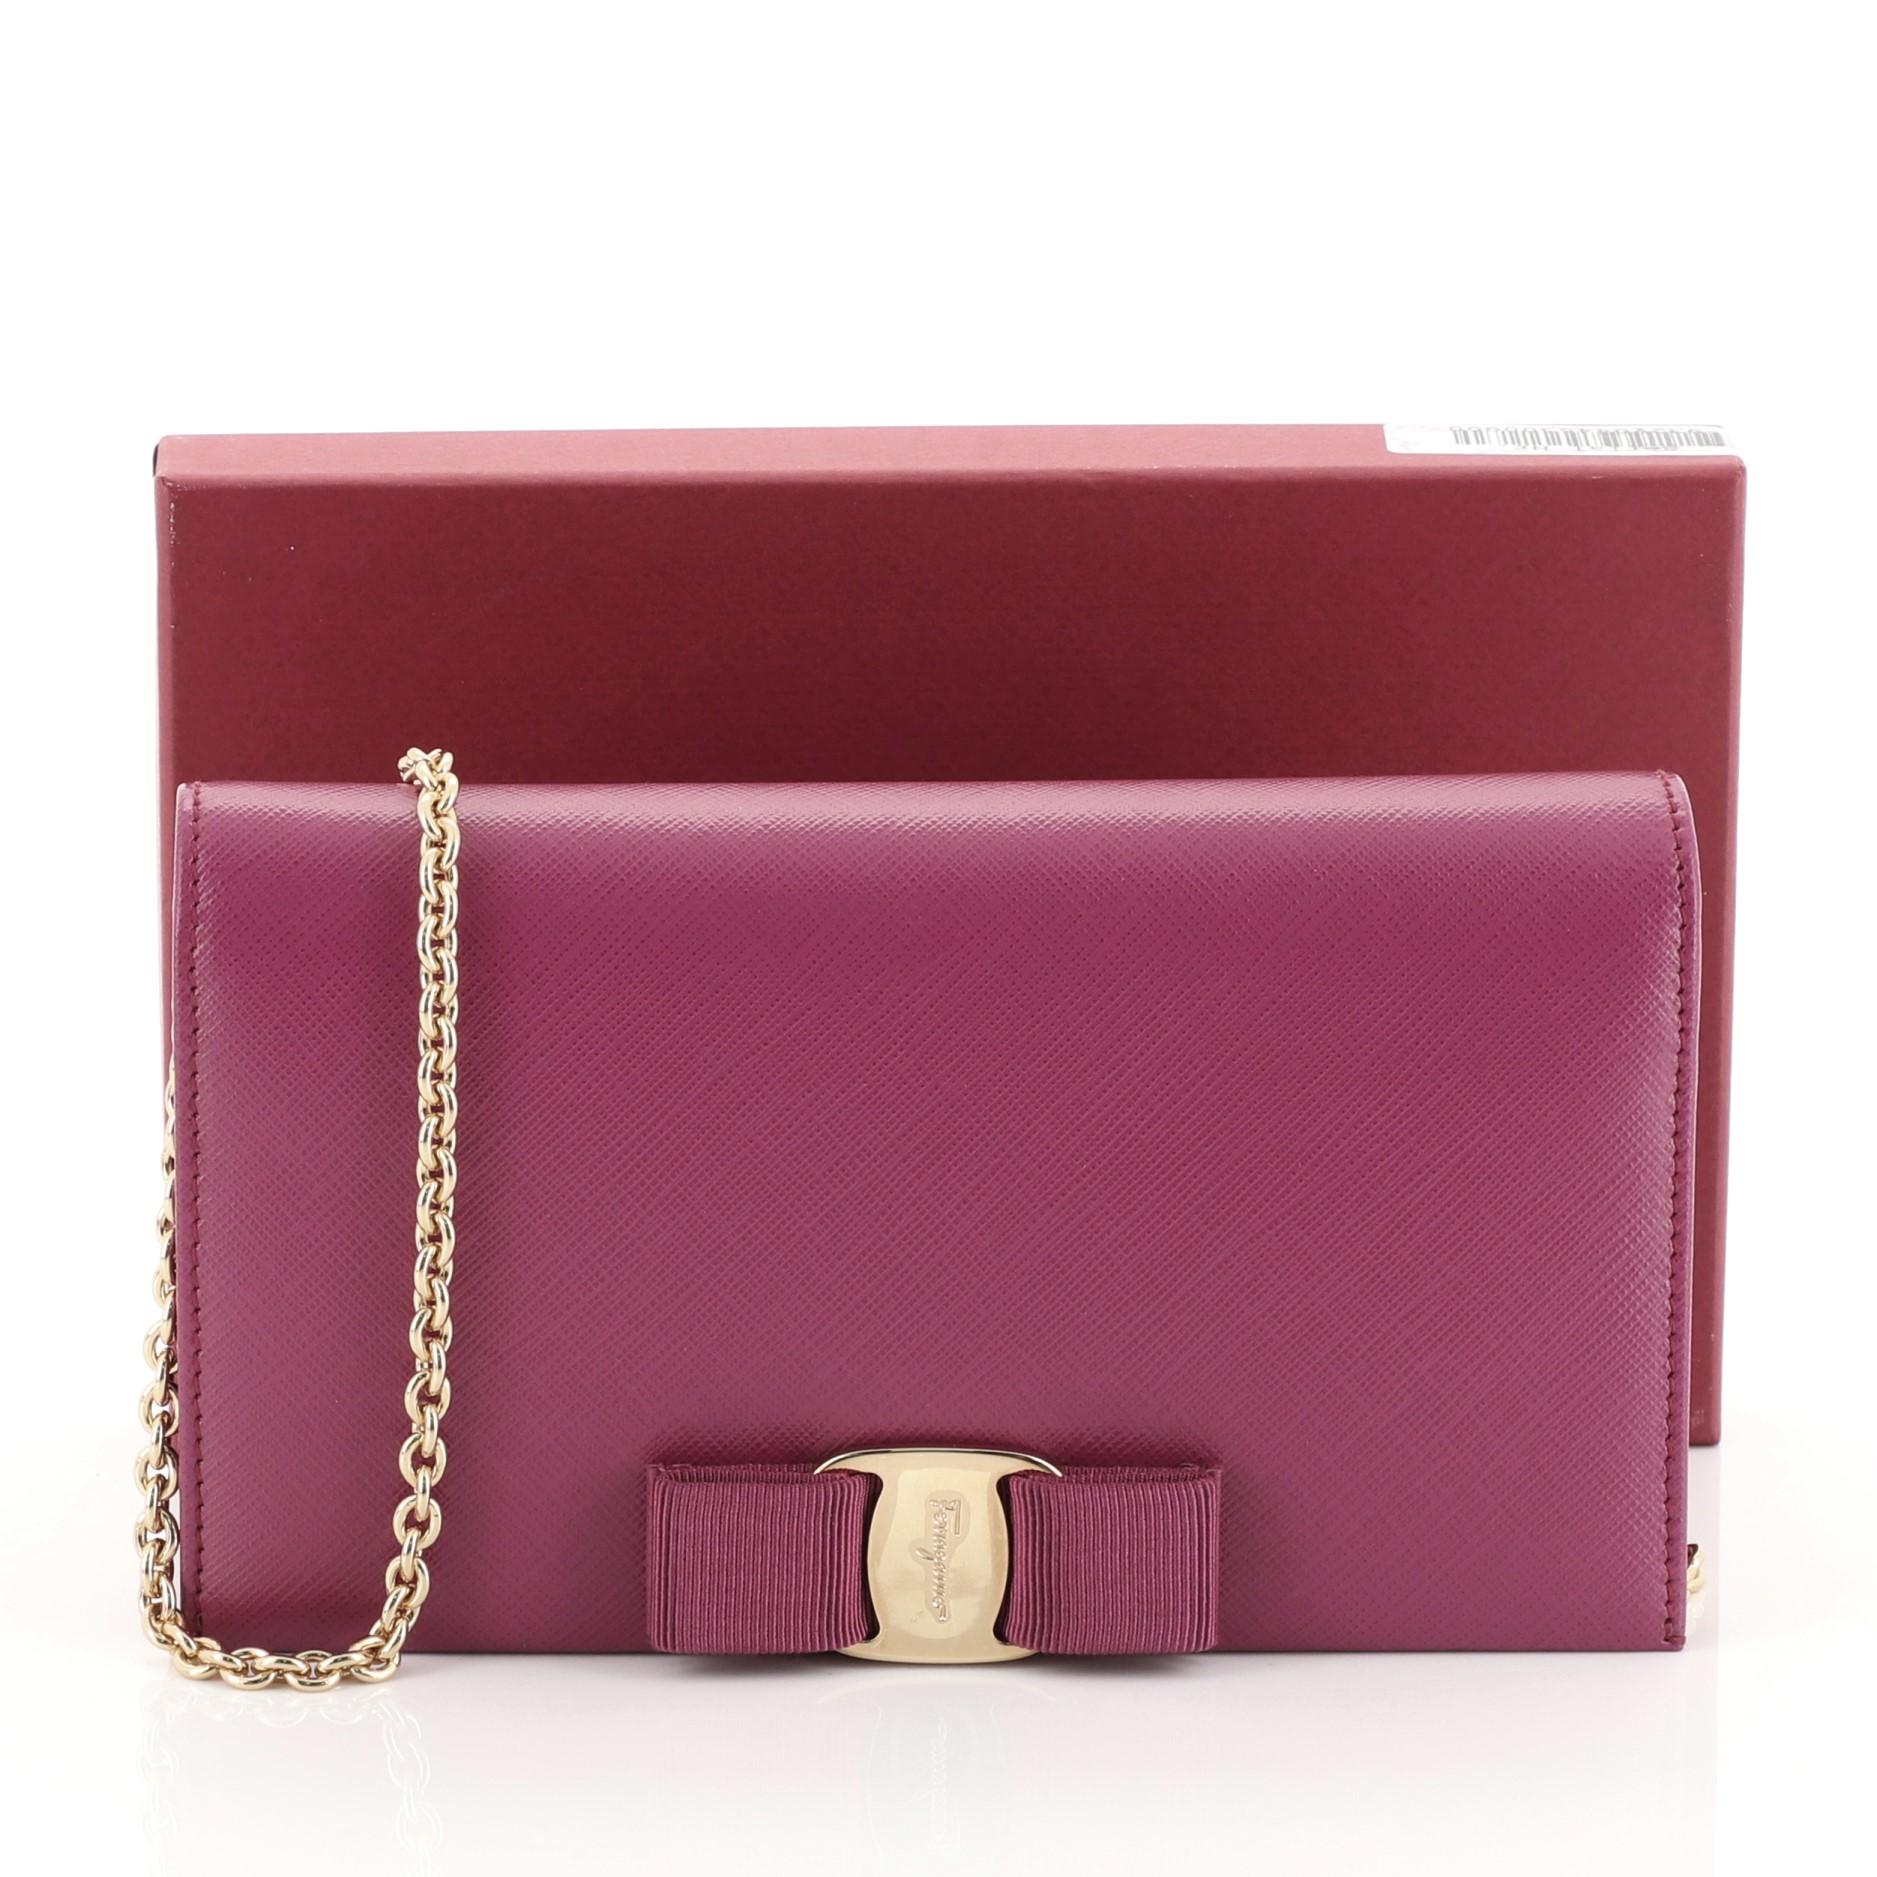 This Salvatore Ferragamo Miss Vara Chain Wallet Saffiano Leather, crafted in purple saffiano leather, features the Vara pleated bow design, long chain strap and gold-tone hardware. Its hidden magnetic snap closure in its flap opens to a purple